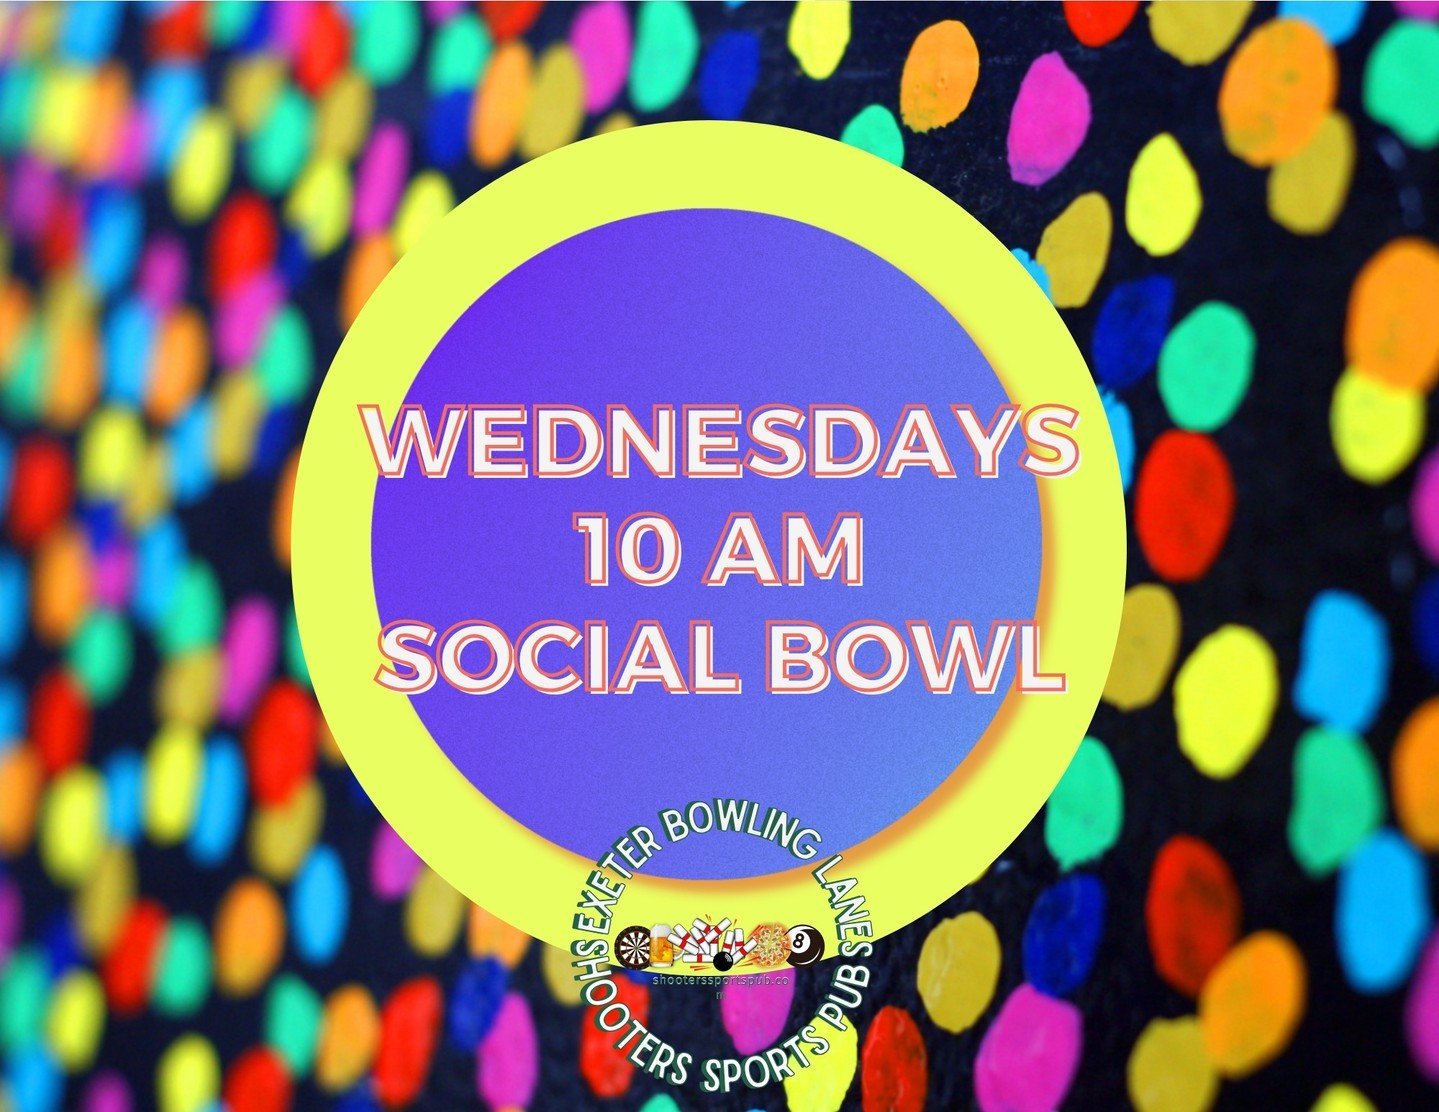 Roll into Wednesday with style and smiles! 🎳✨ ⁠
⁠
Join us for our Wednesday Morning Social Bowl &ndash; where it&rsquo;s all about fun, friends, and strikes. 🌟 ⁠
⁠
No teams, just good times from 10 AM. Only $11 for 3 games + free shoe rental! ⁠
⁠
P